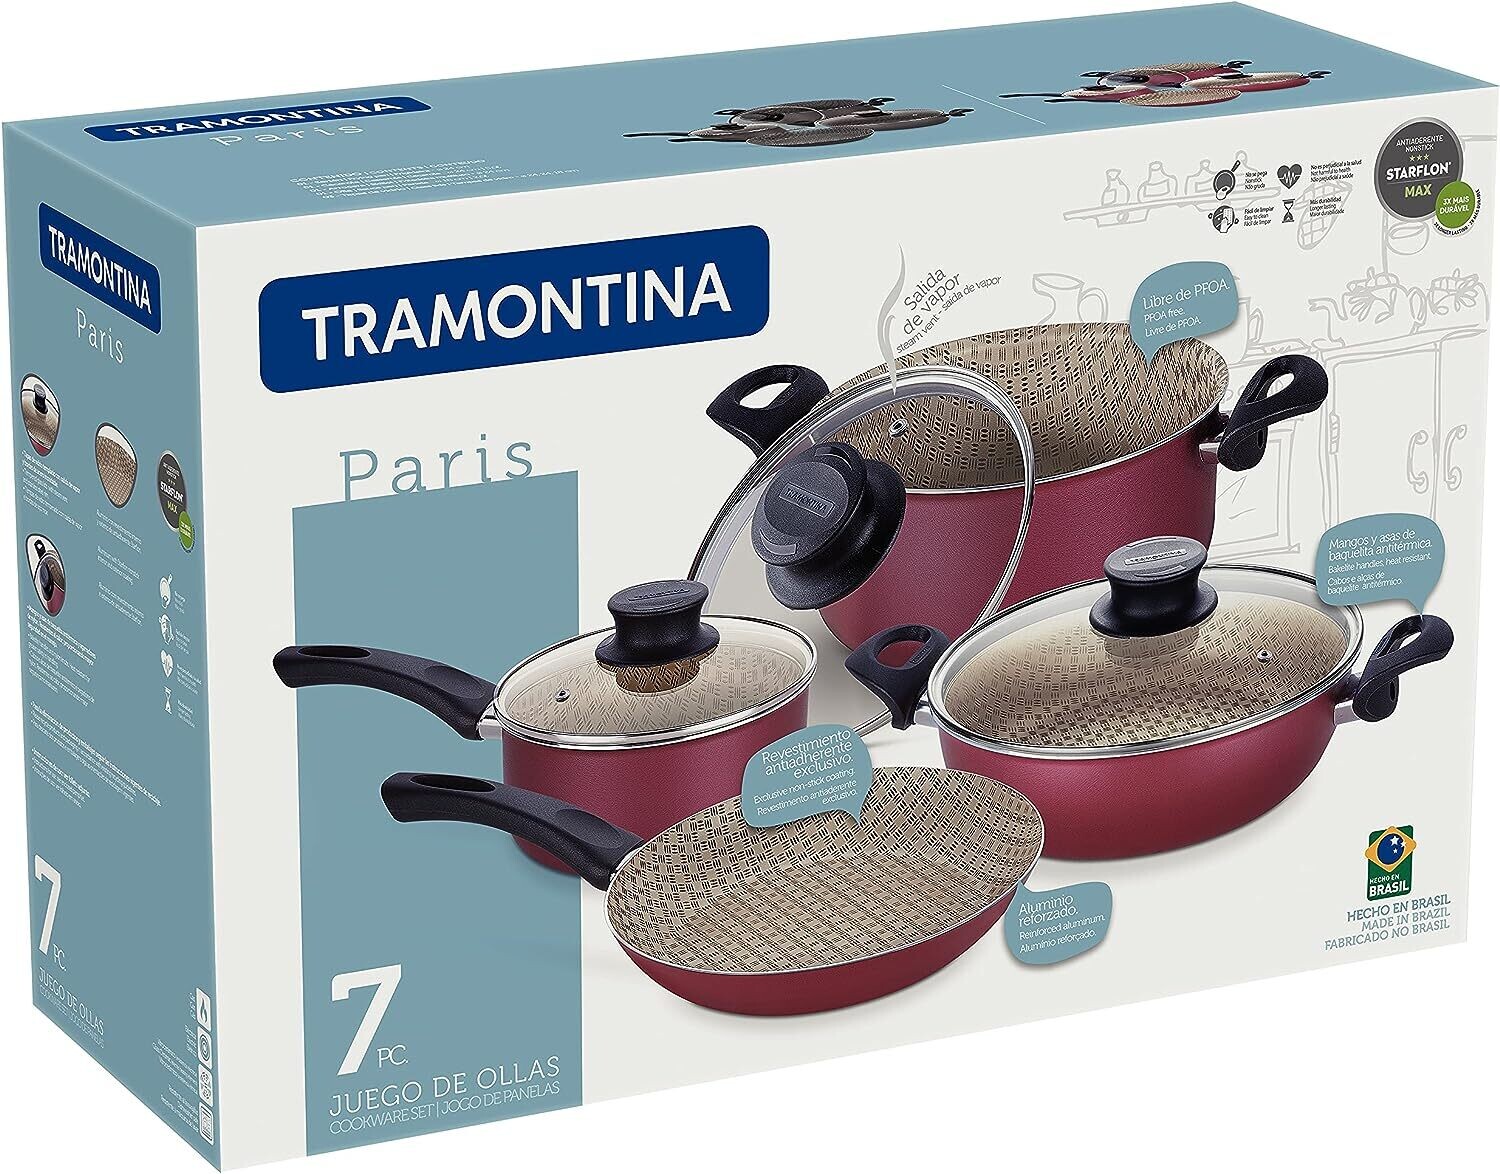 Tramontina Non-stick 7 pcs Cookware Set with all Pots Needed for your Meals! Contains 26cm,24cm,20cm &amp;24cm frying pan